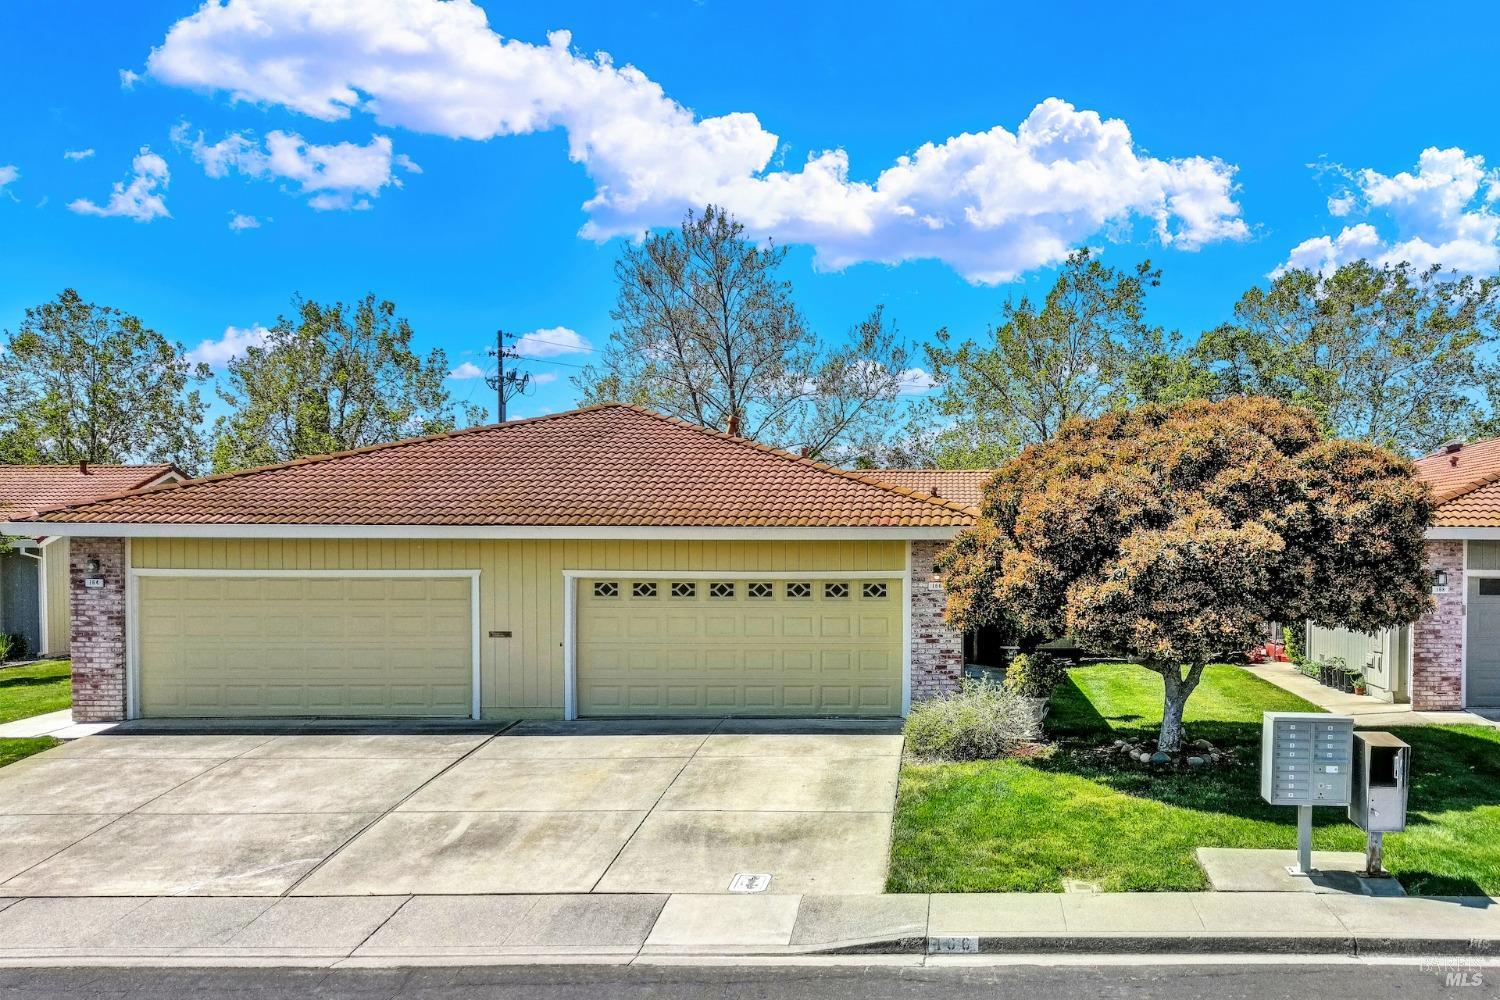 Photo of 166 Bryce Wy in Vacaville, CA